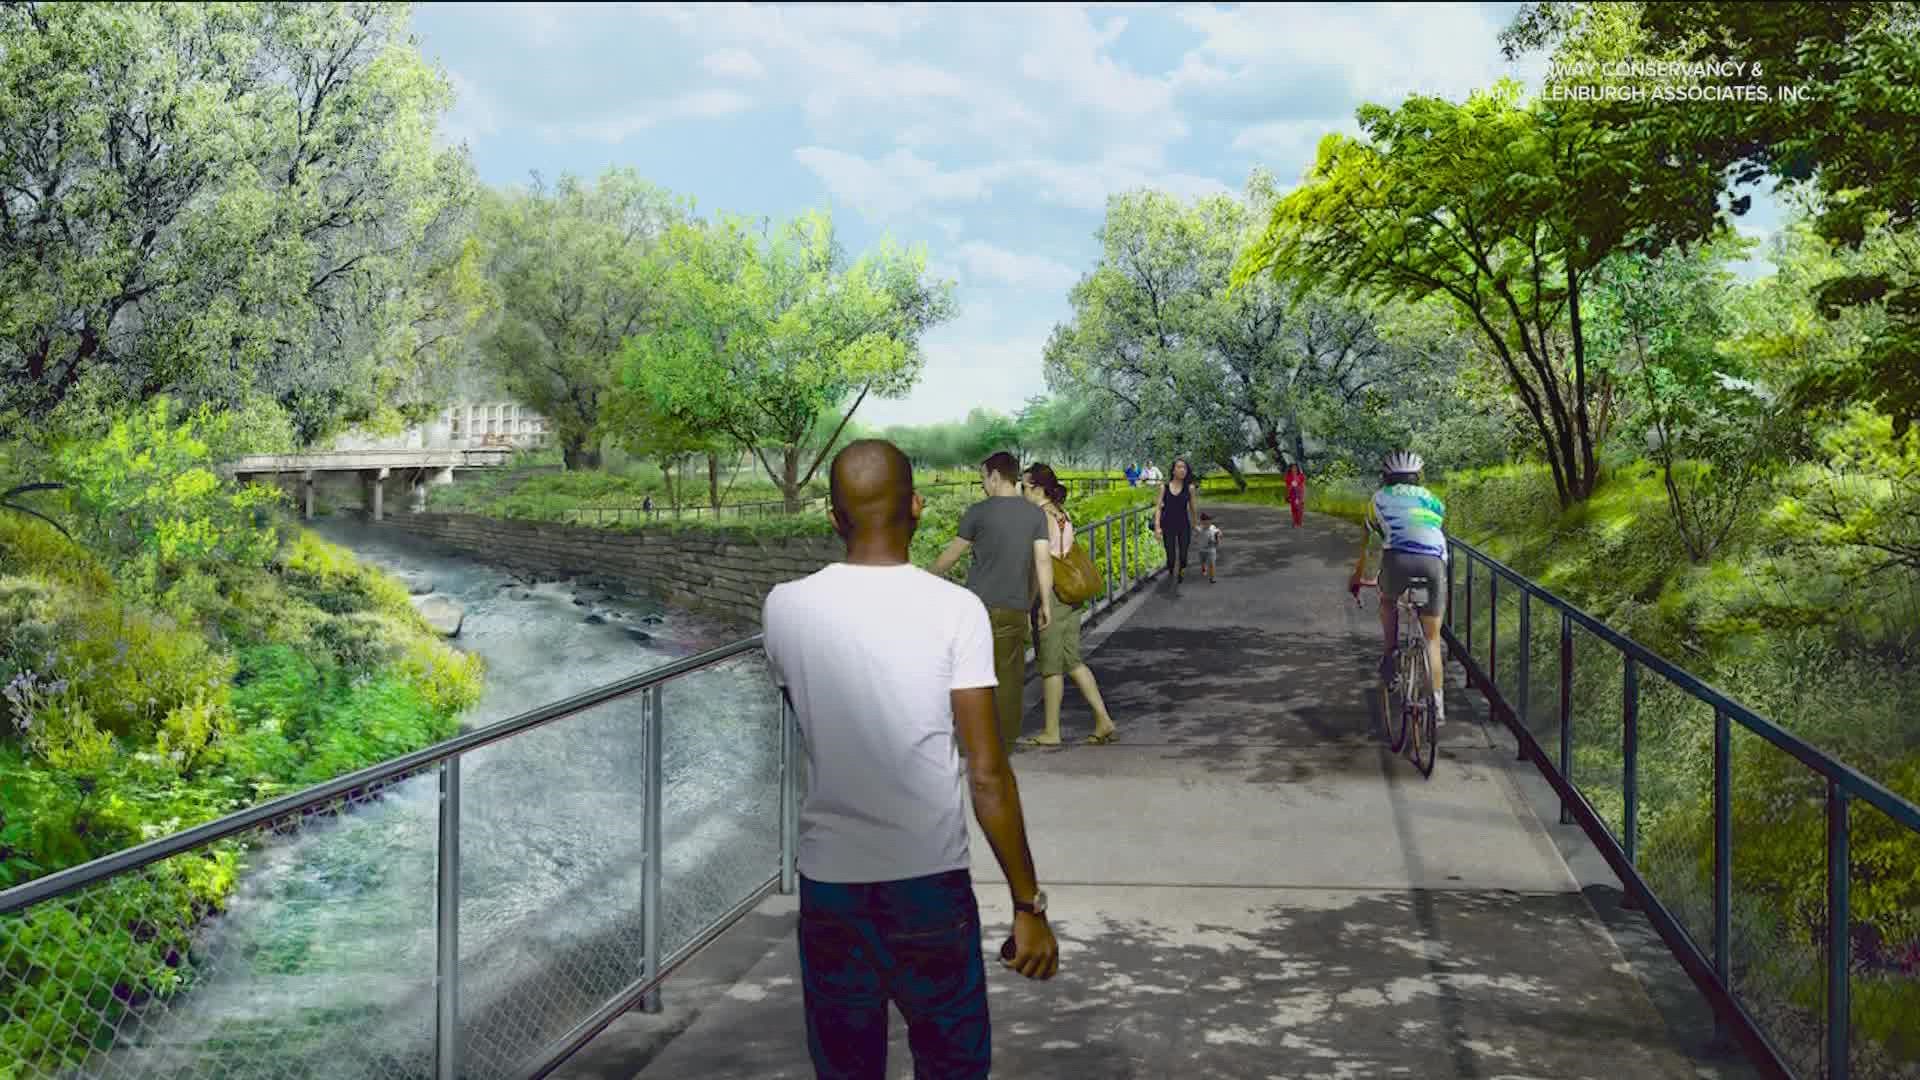 This is part of a bigger park system along Waller Creek in Downtown Austin.